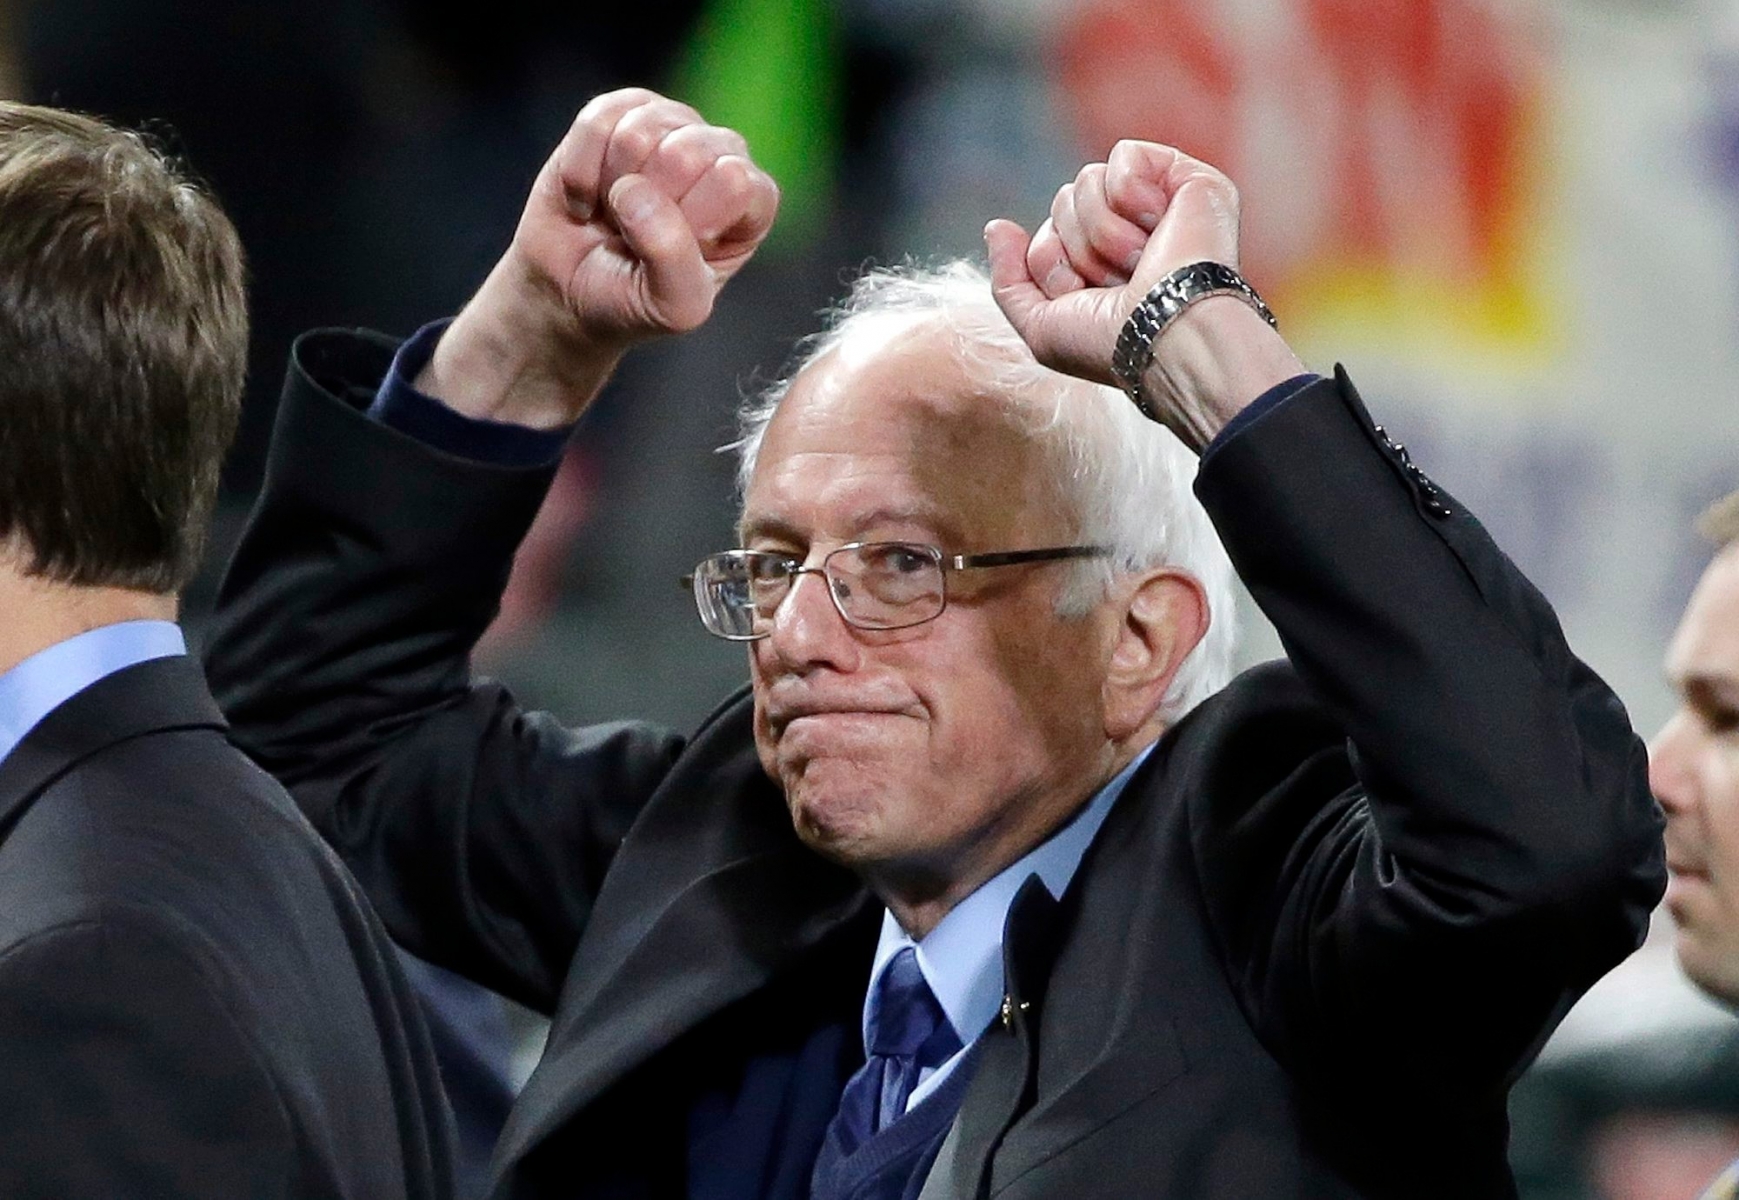 Democratic presidential candidate Sen. Bernie Sanders, I-Vt., pumps his fists as he leaves the field after speaking at a rally Friday, March 25, 2016, in Seattle. (AP Photo/Elaine Thompson) DEM 2016 Sanders